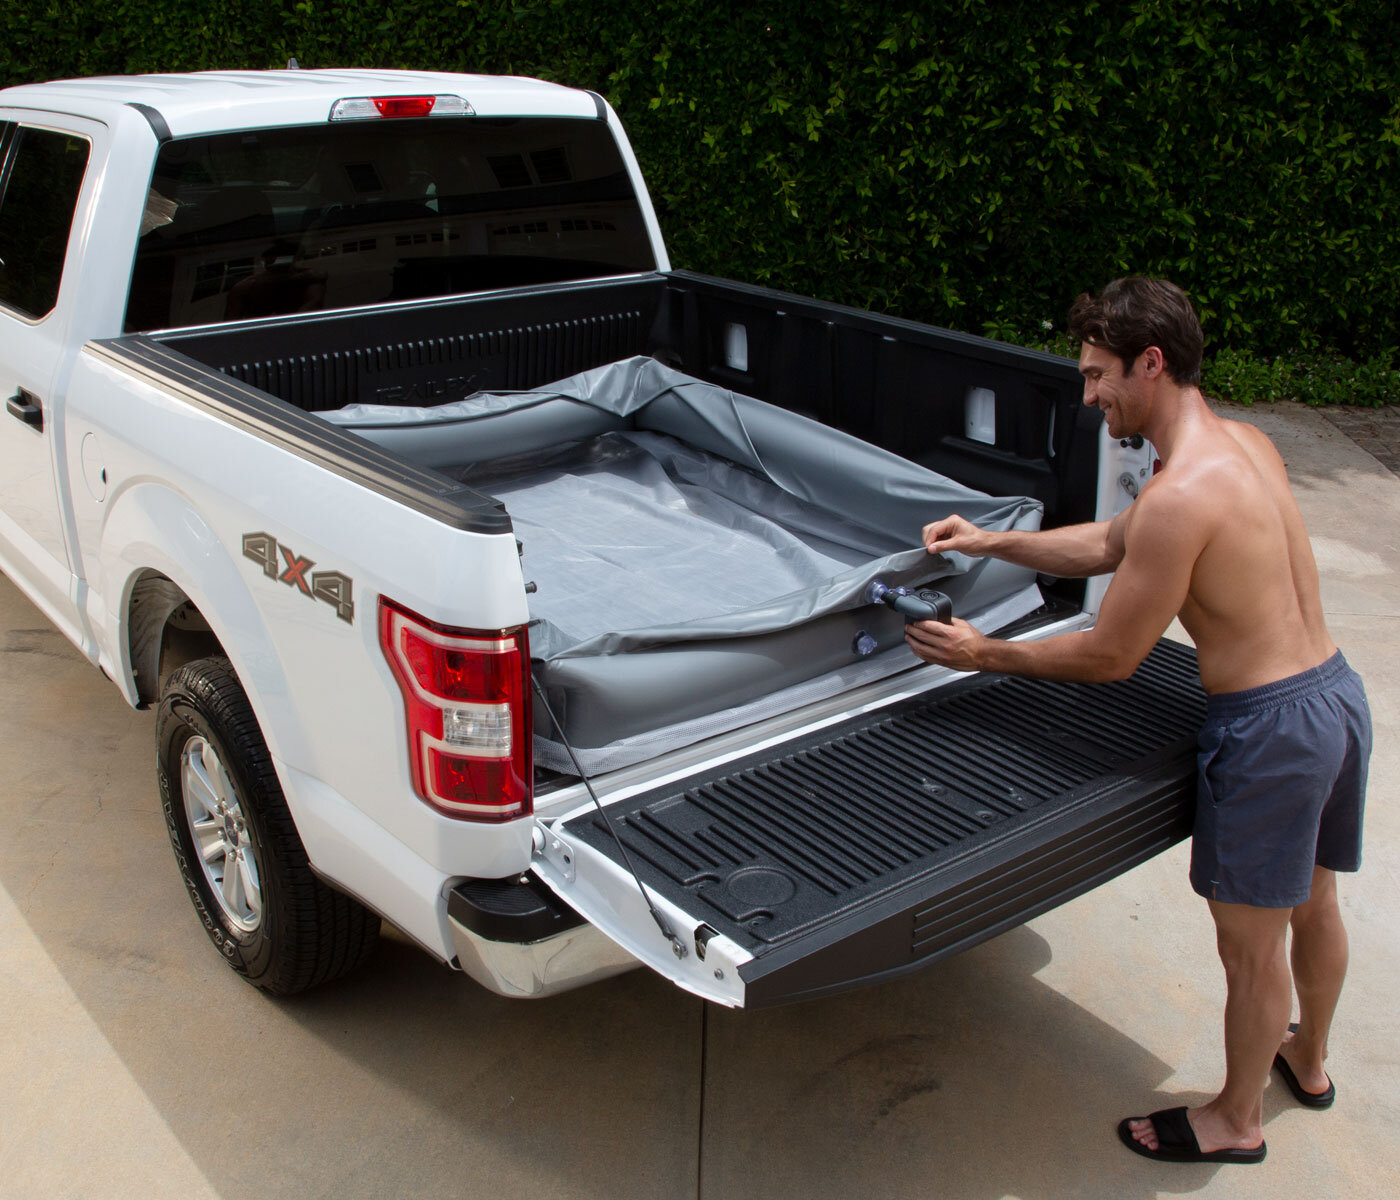 Summer Waves Inflatable Truck Bed Pool 66"x62"x21" FREE SAME DAY SHIPPING! 